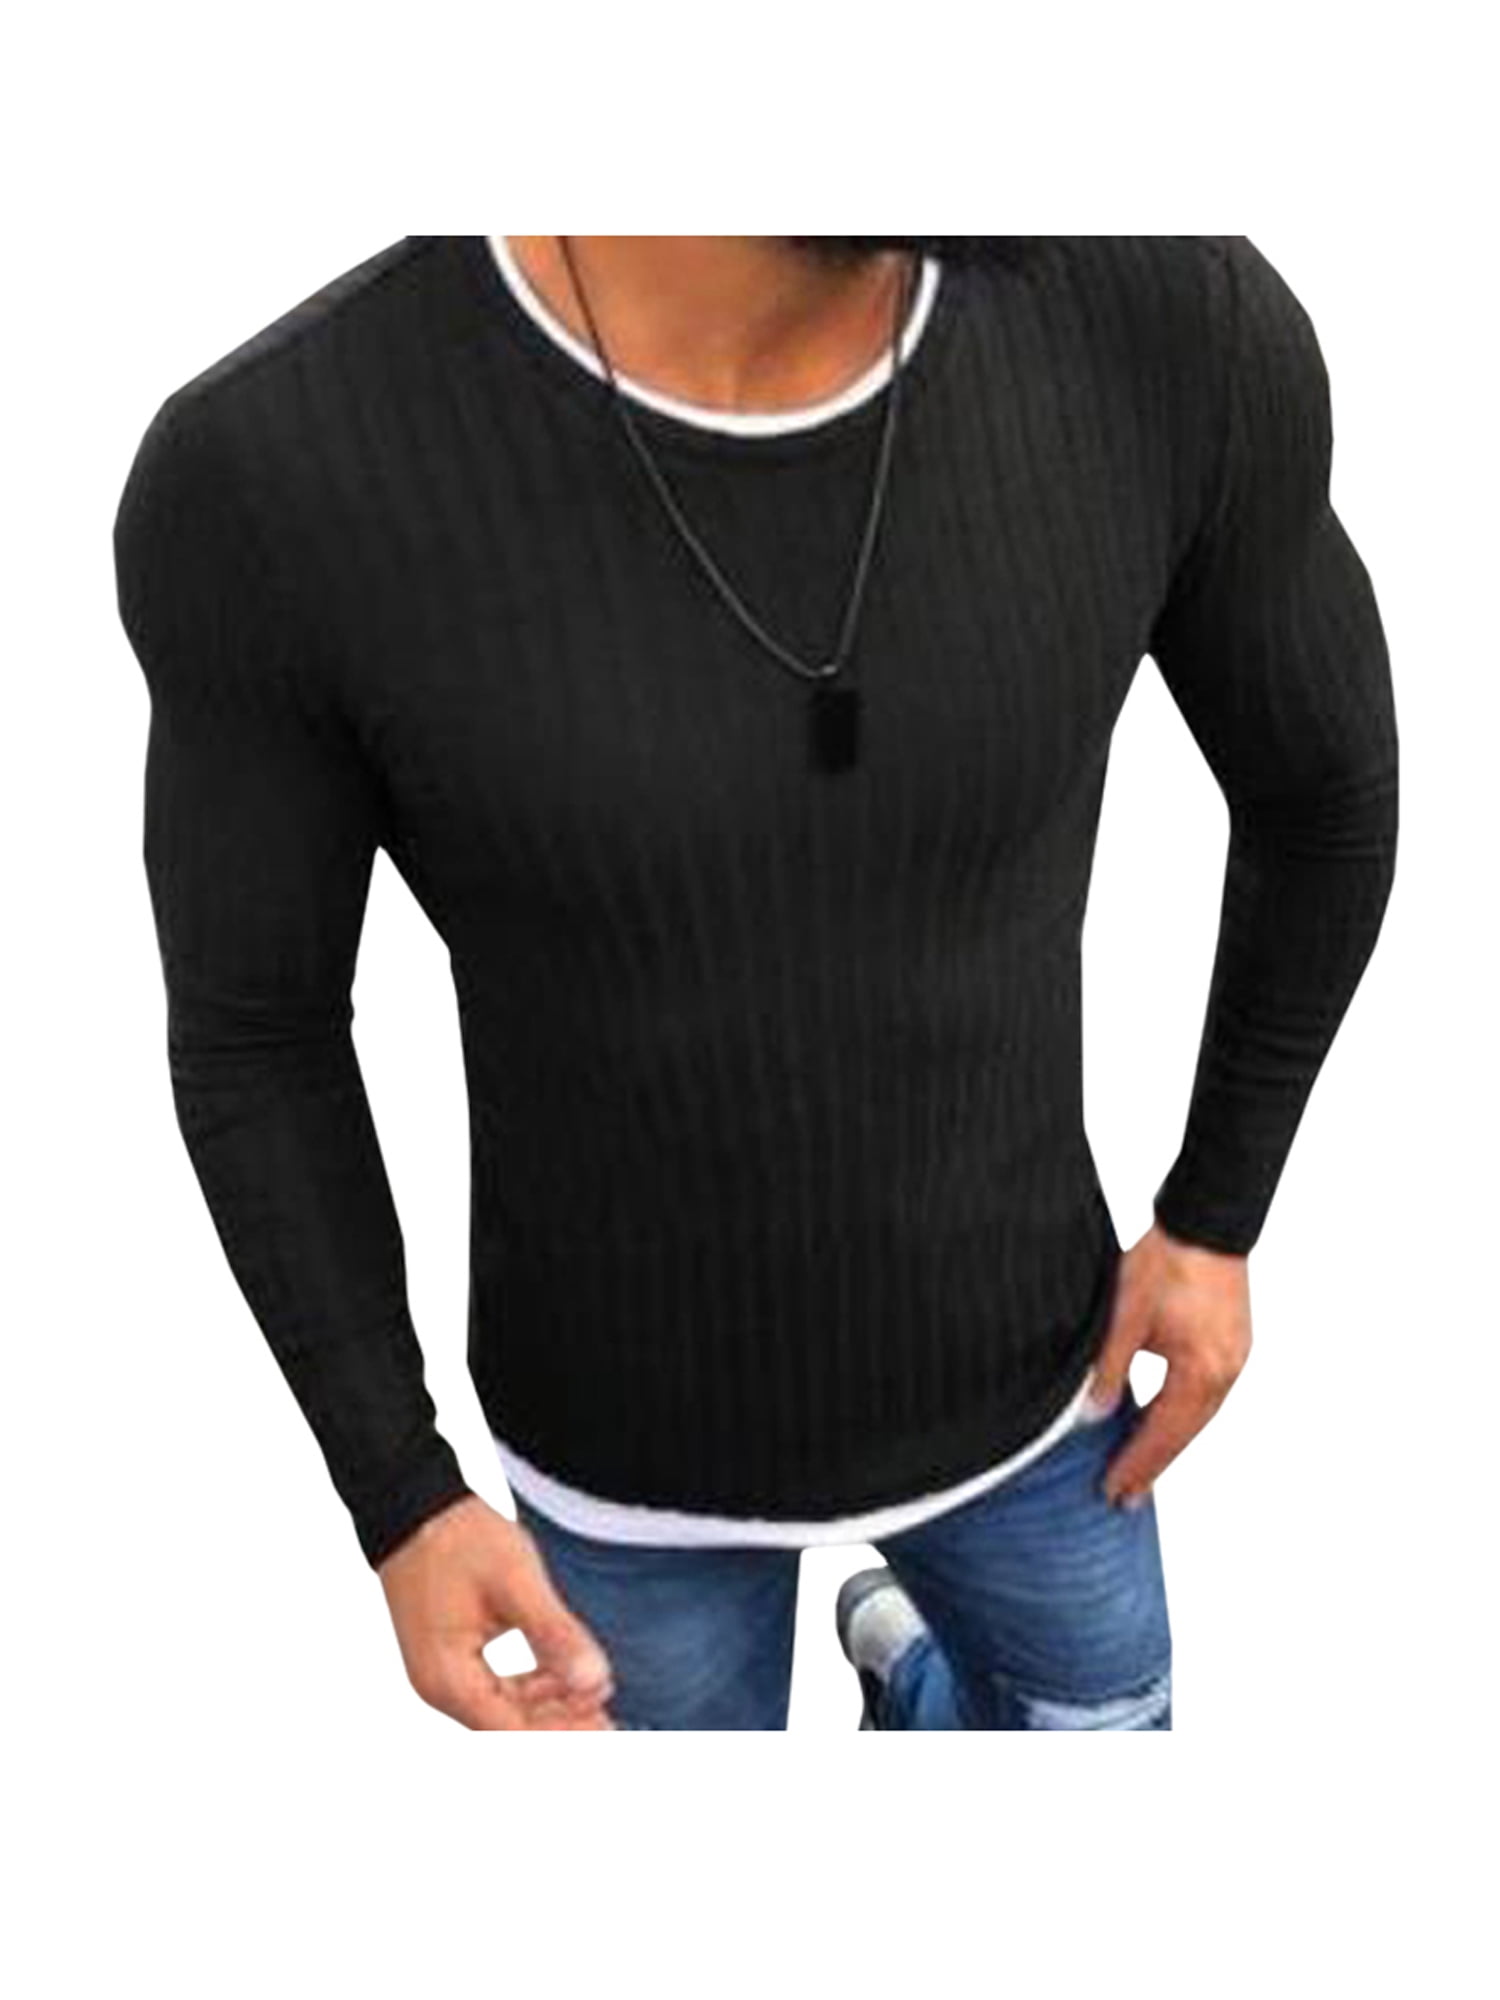 Fensajomon Mens Slim Fit Long Sleeve Knit Stretchy Thermal Pullover Sweater Jumper